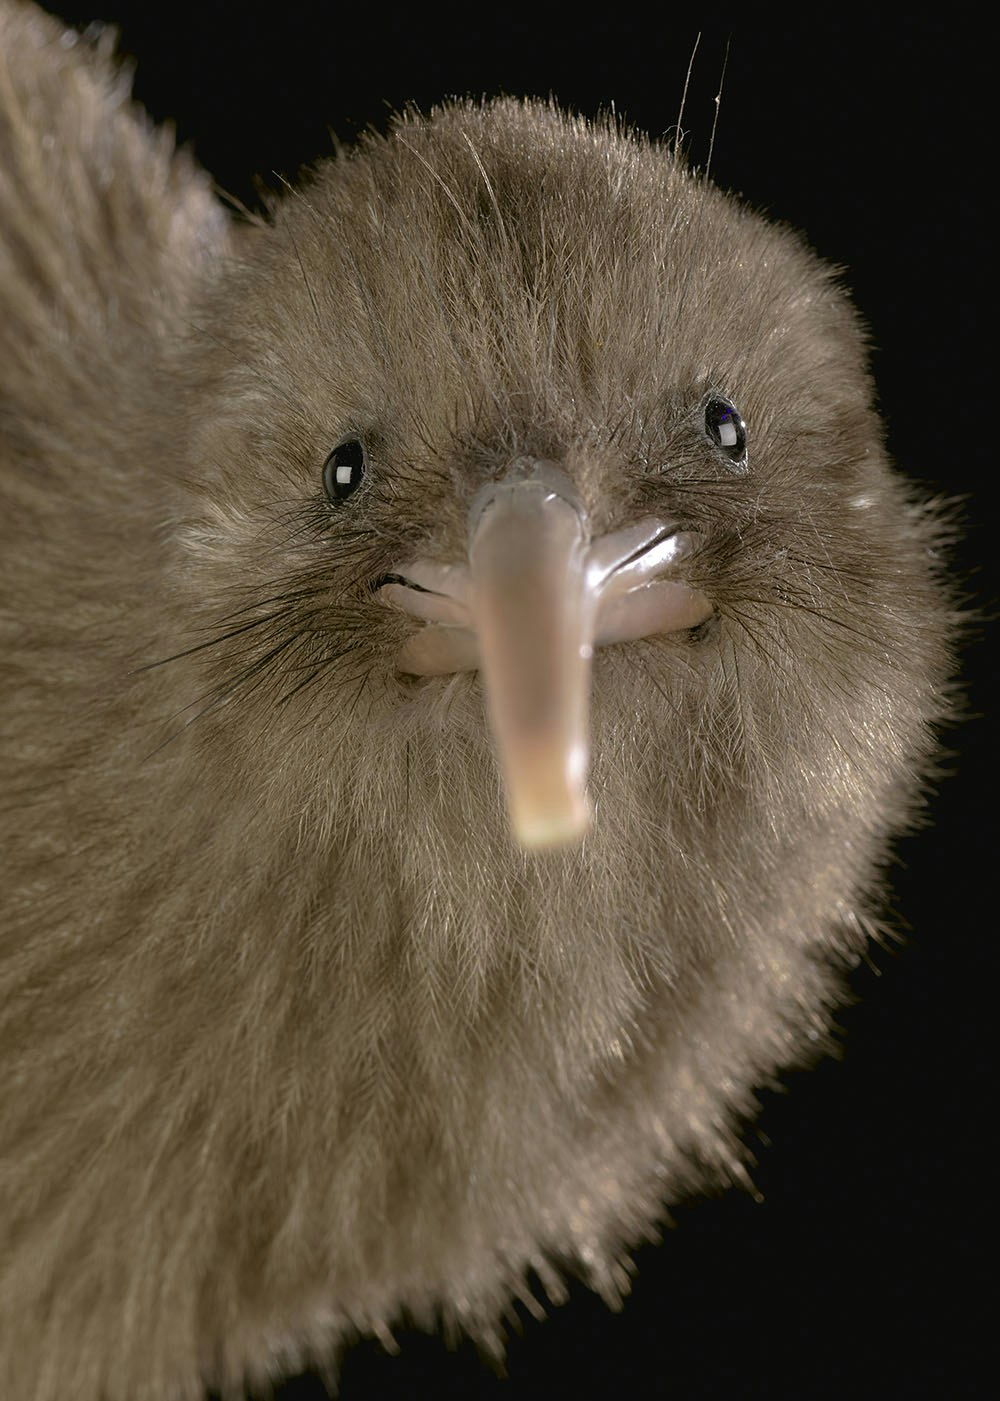 Head and beak of a taxidermied bird facing the camera